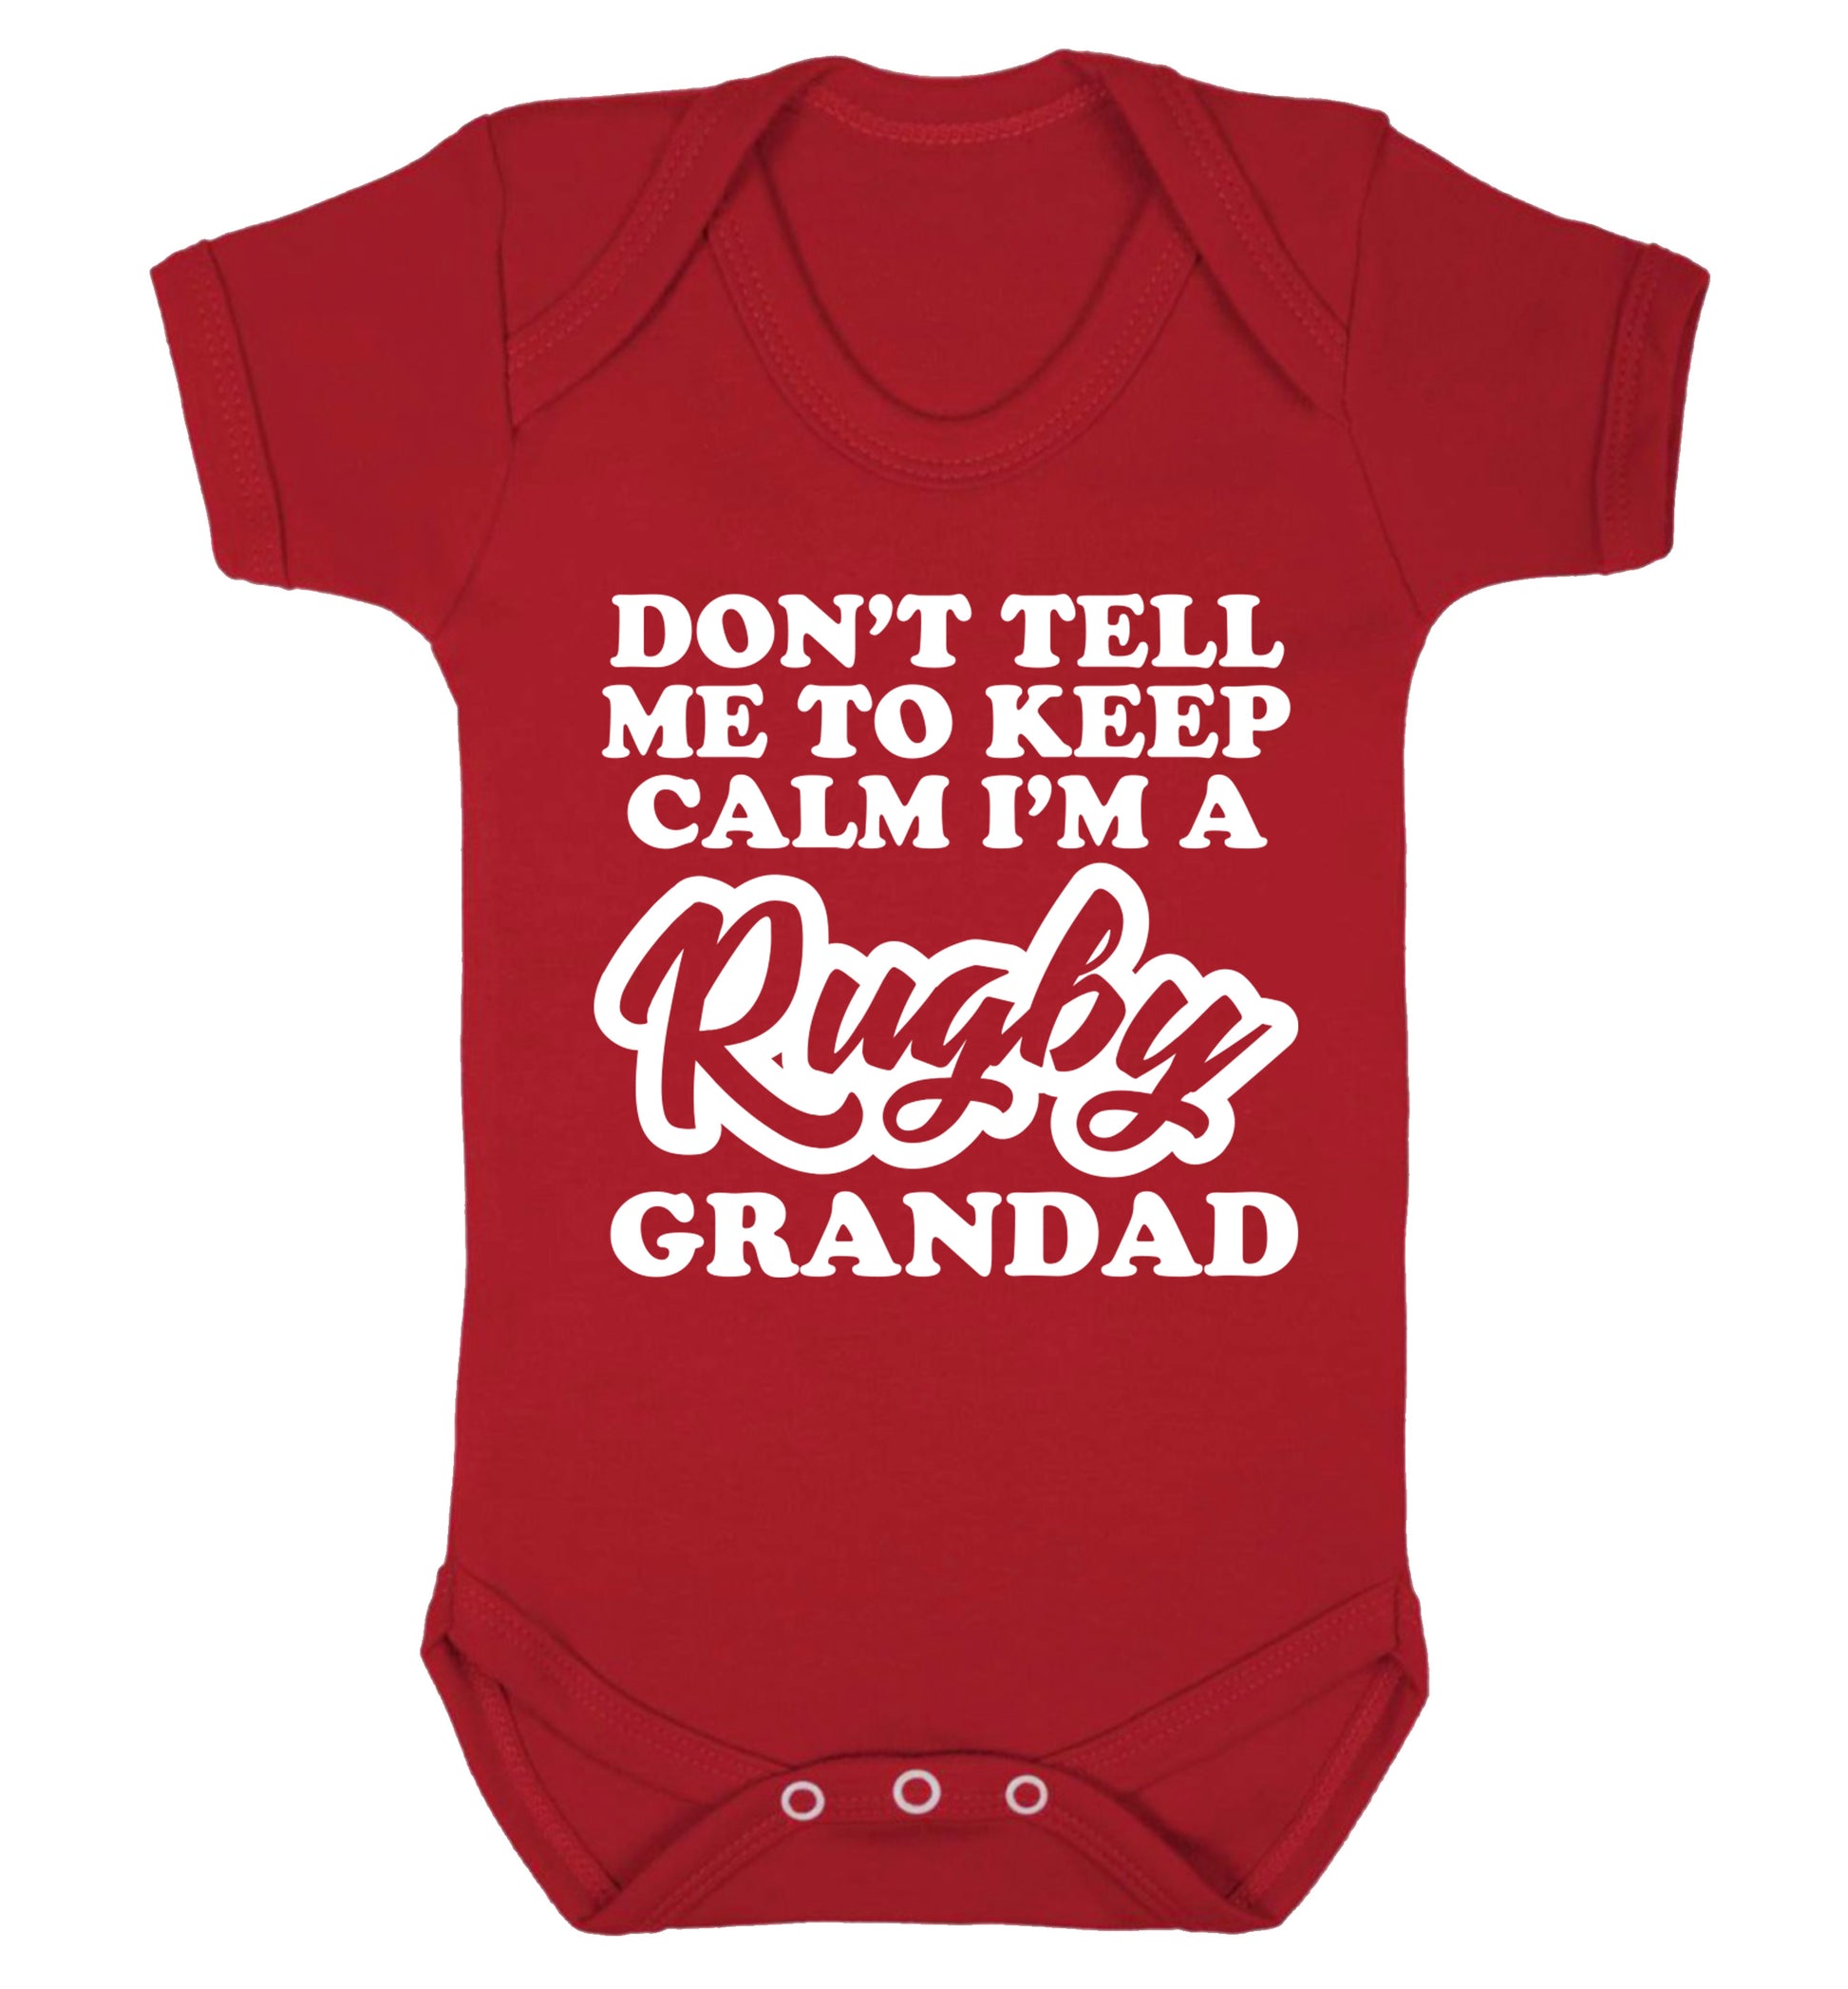 Don't tell me to keep calm I'm a rugby dad Baby Vest red 18-24 months